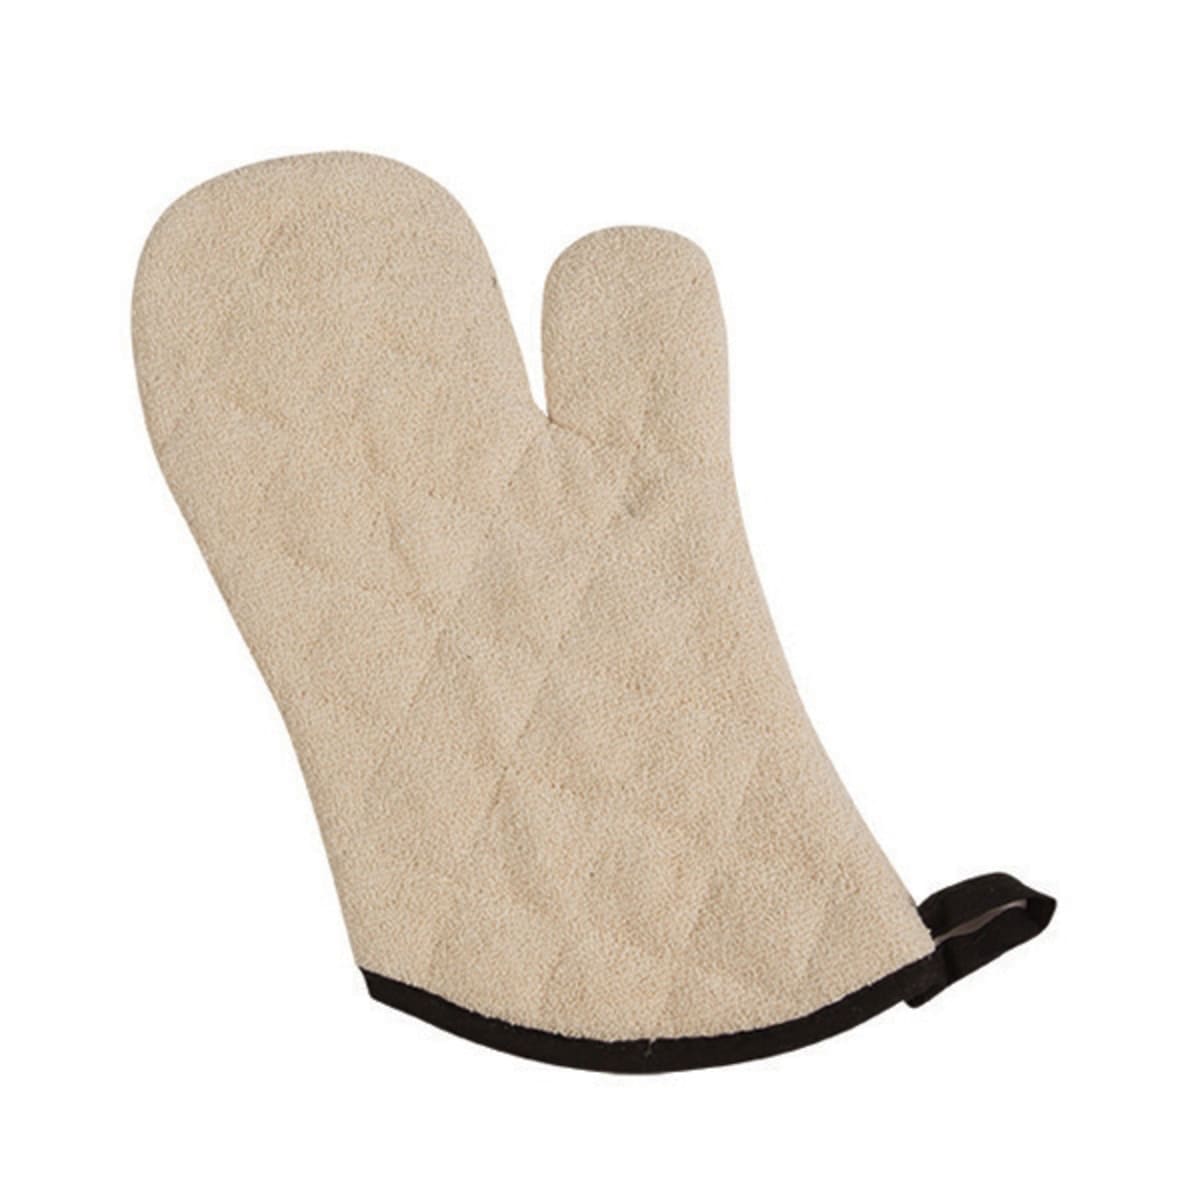 Terry Oven Mitt - One, 17 inches